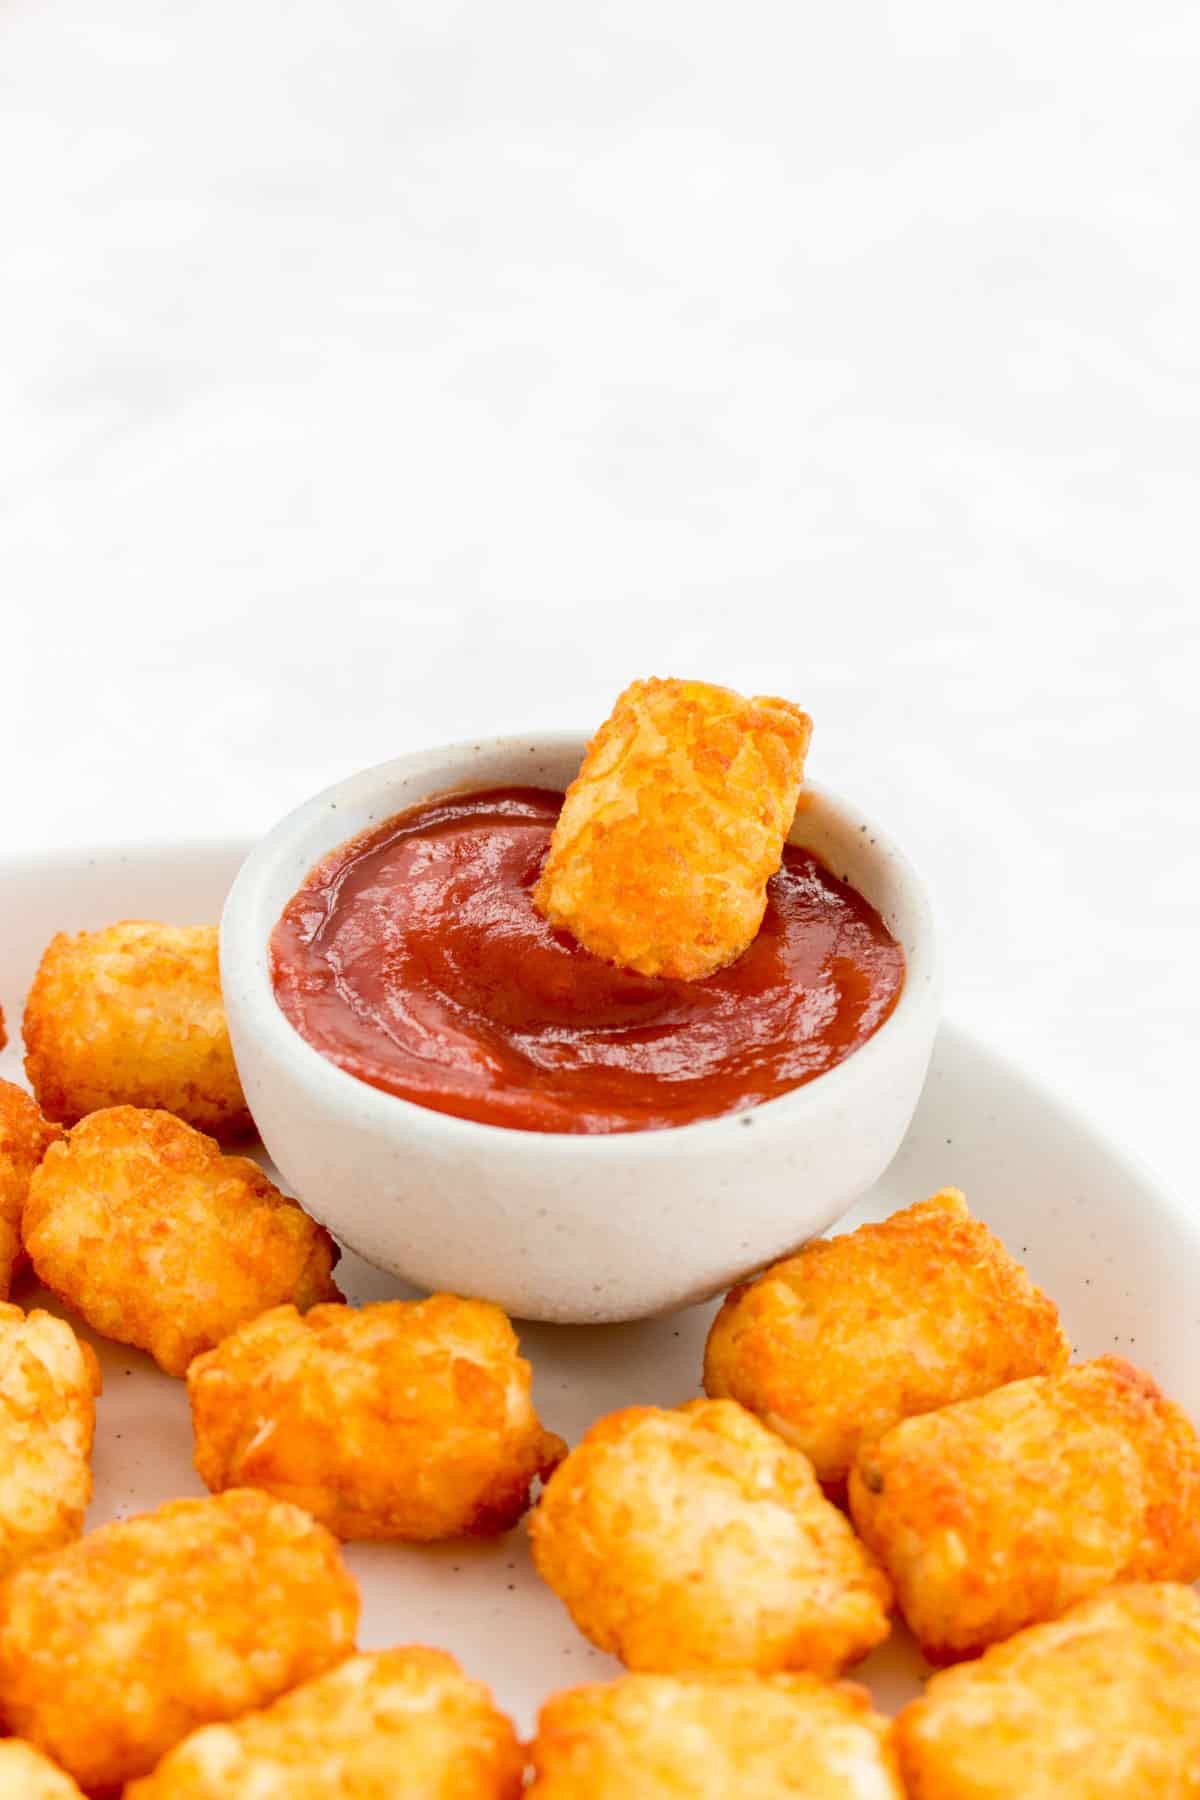 Air fryer tater tots dipped in ketchup.